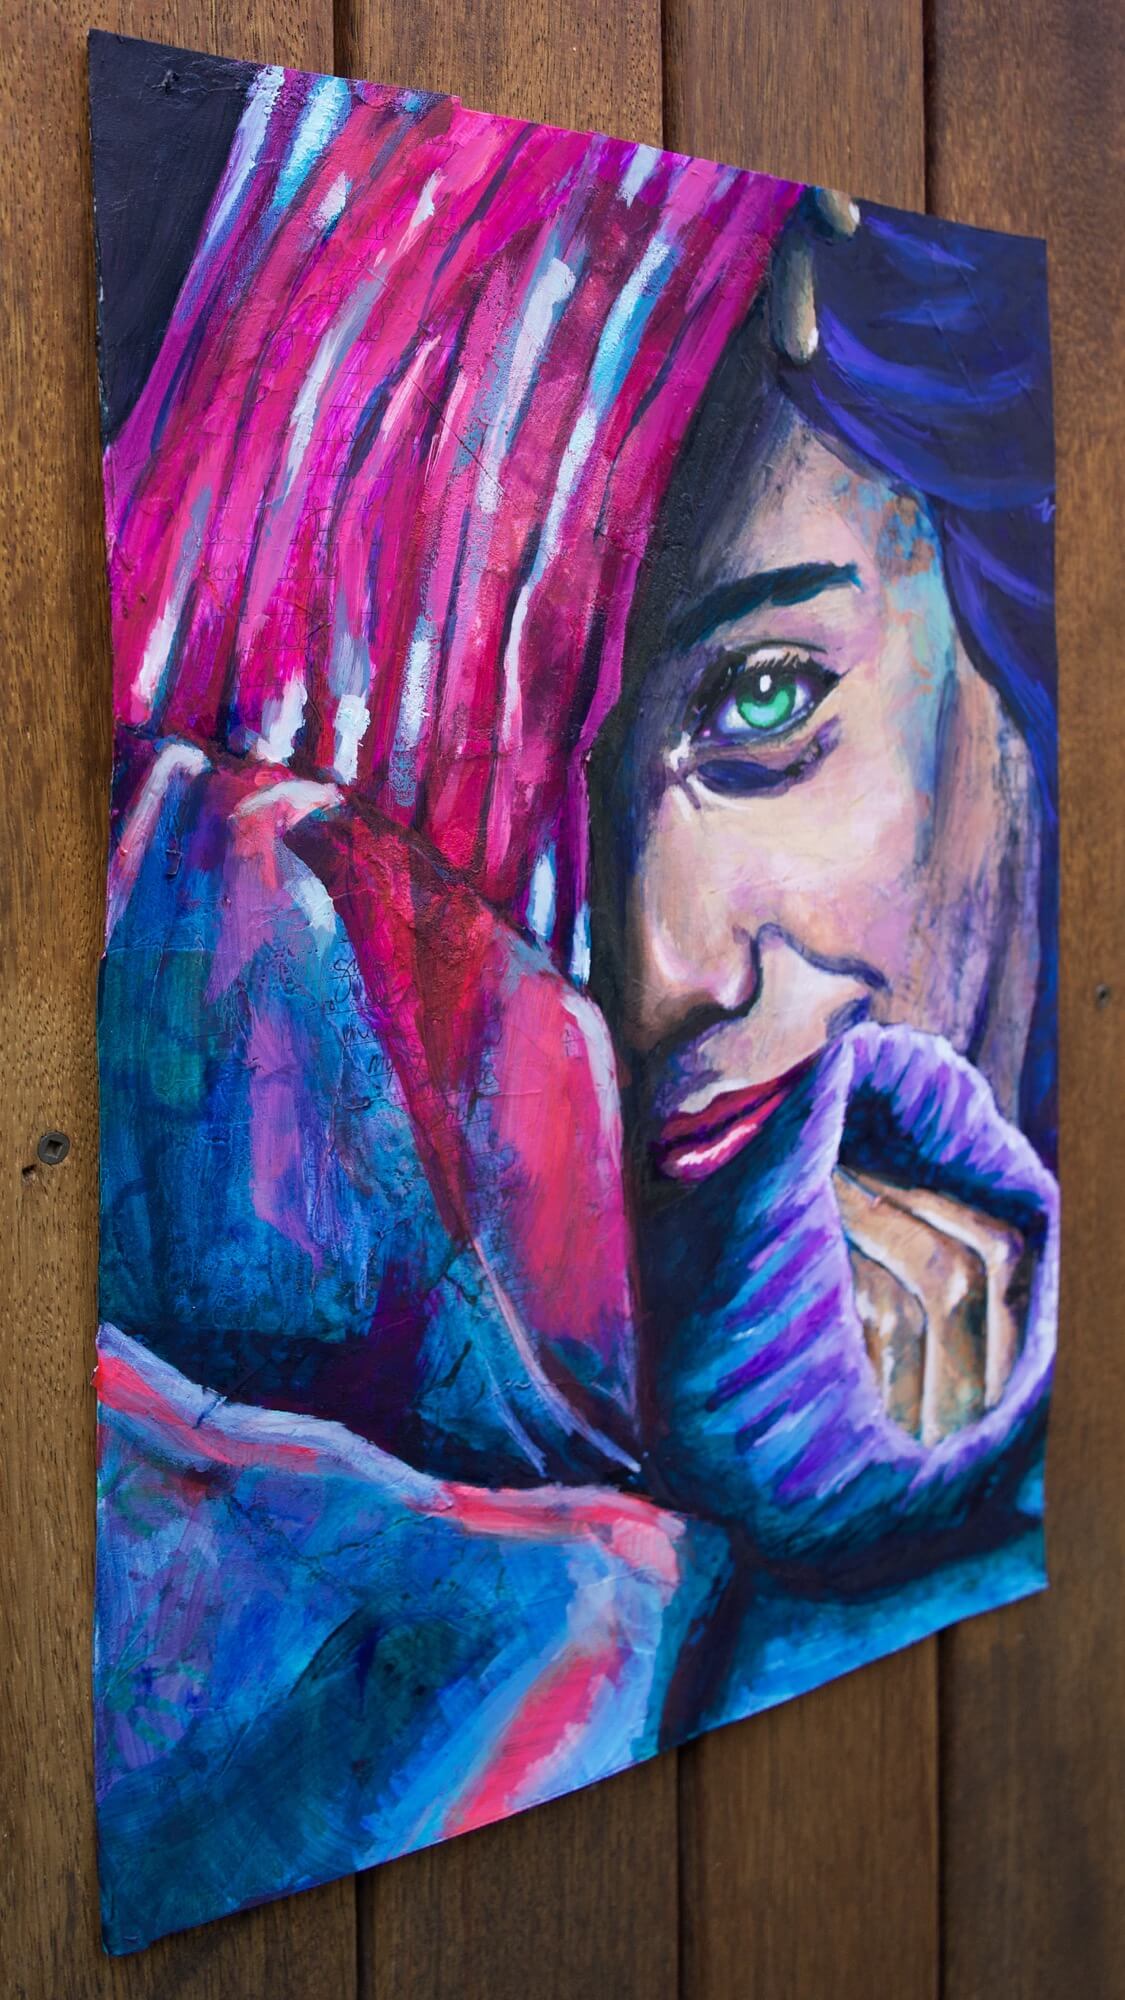 Mixed media painting of a woman wearing a sweater in pink and blue